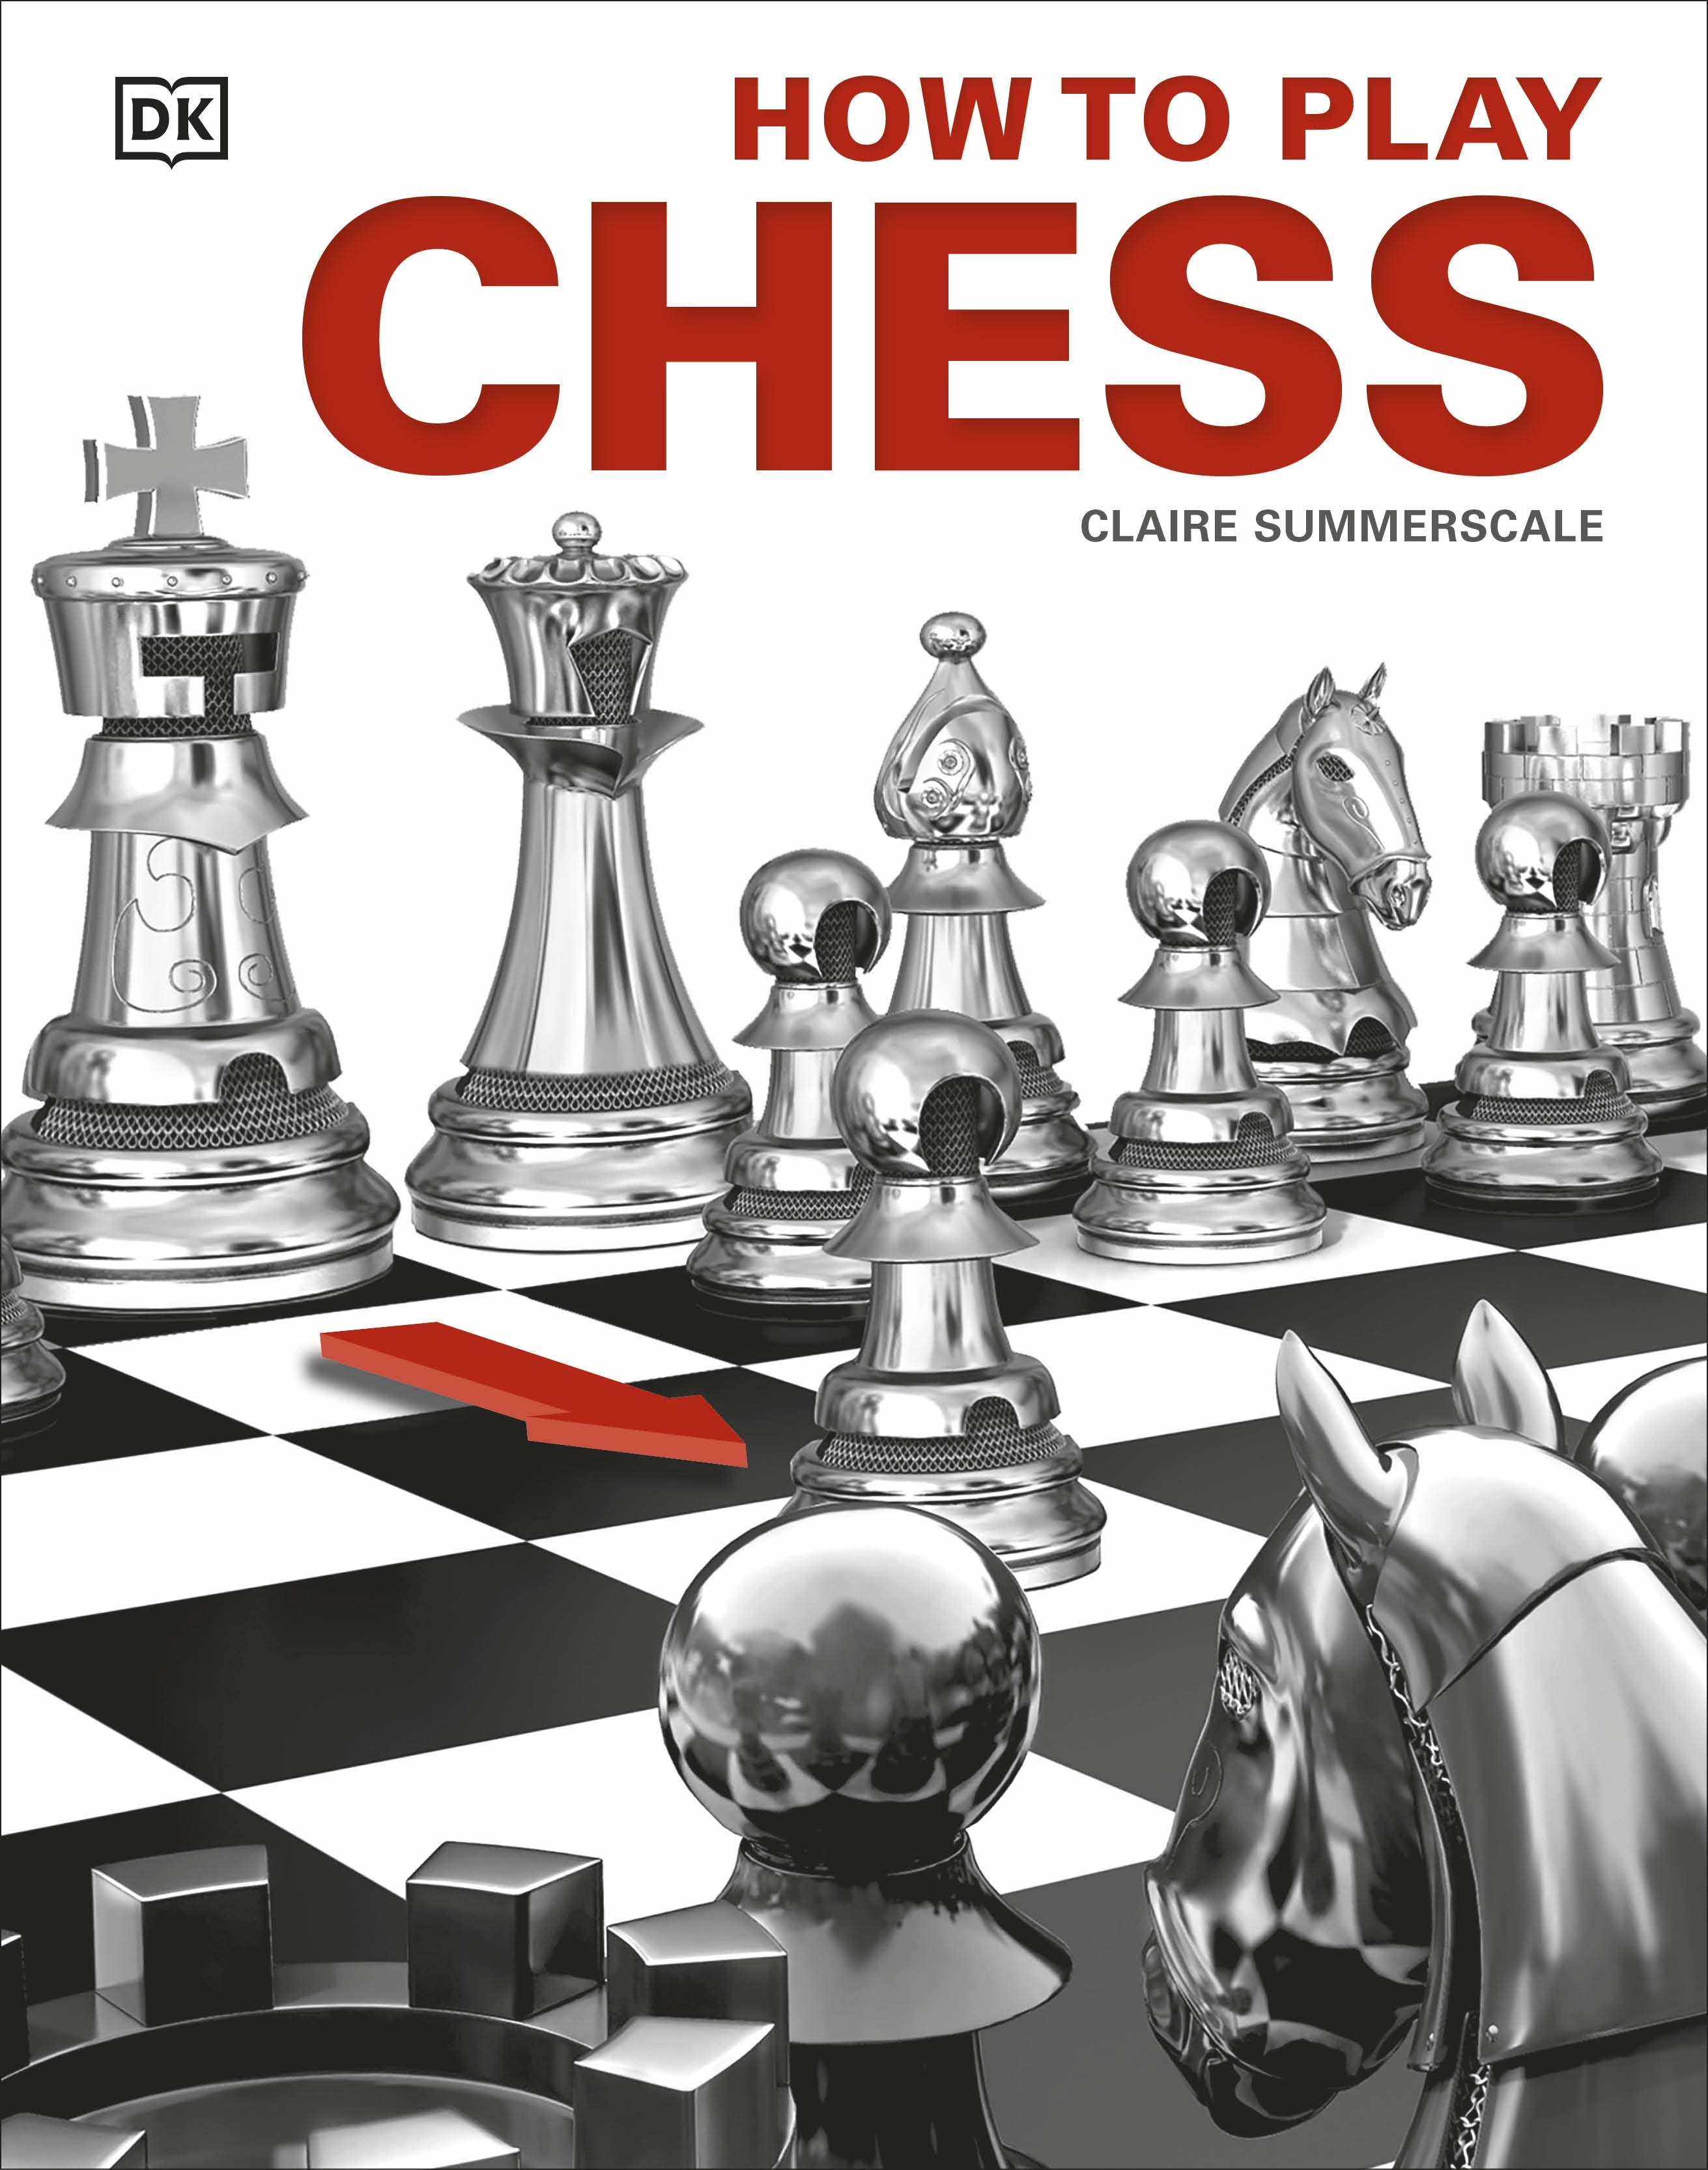 Pressed out. Шахматы на английском языке. Chess book. Шахматы Клер. Аут в шахматах.